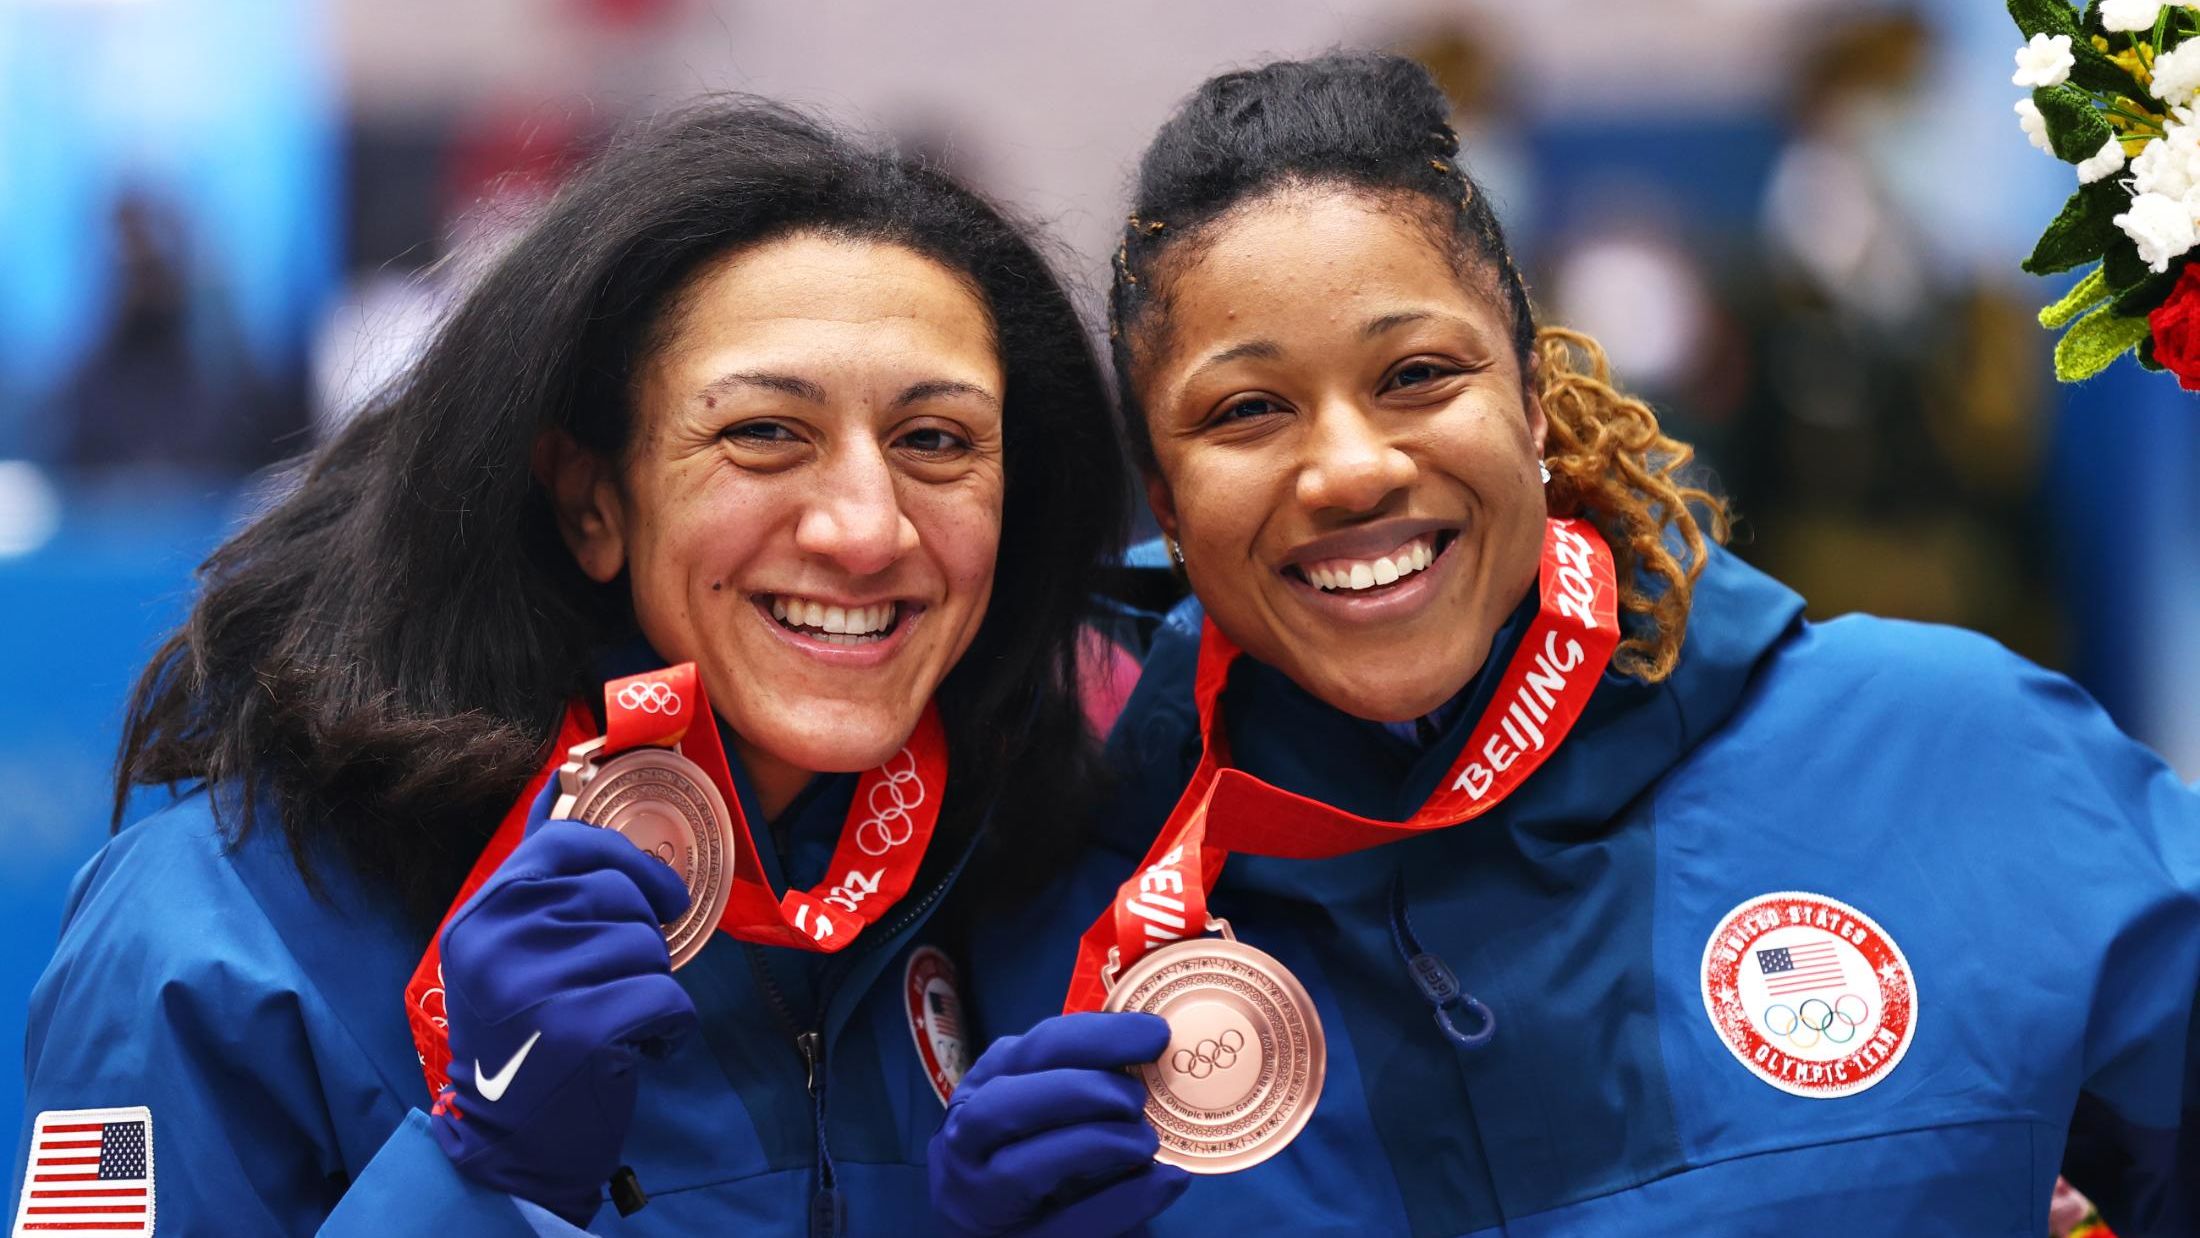 Bronze medal winners Meyers Taylor and Hoffman of Team United States pose for a photo during the flower ceremony.